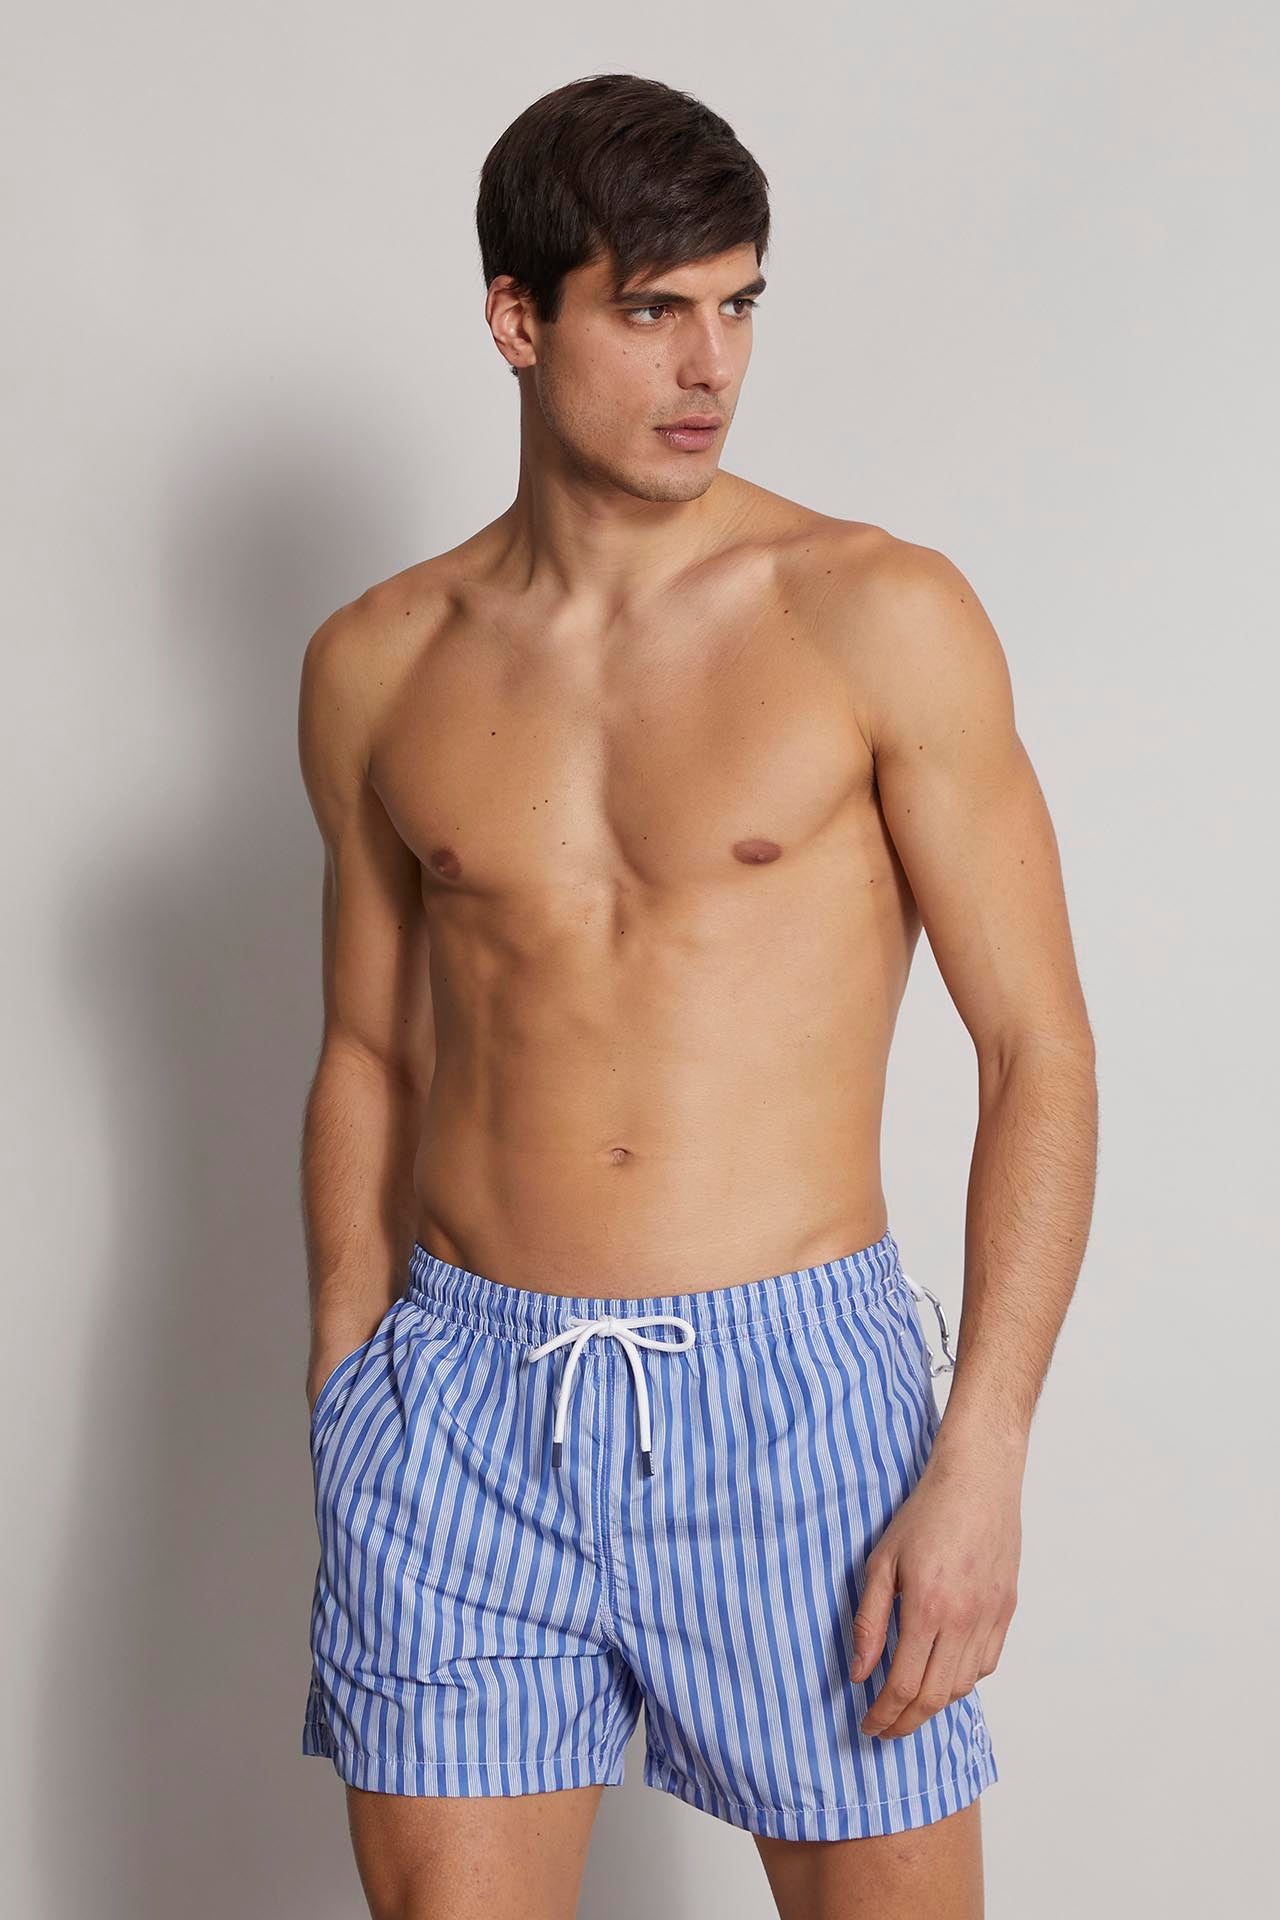 Madeira - the sustainable swim trunk - stripes pattern